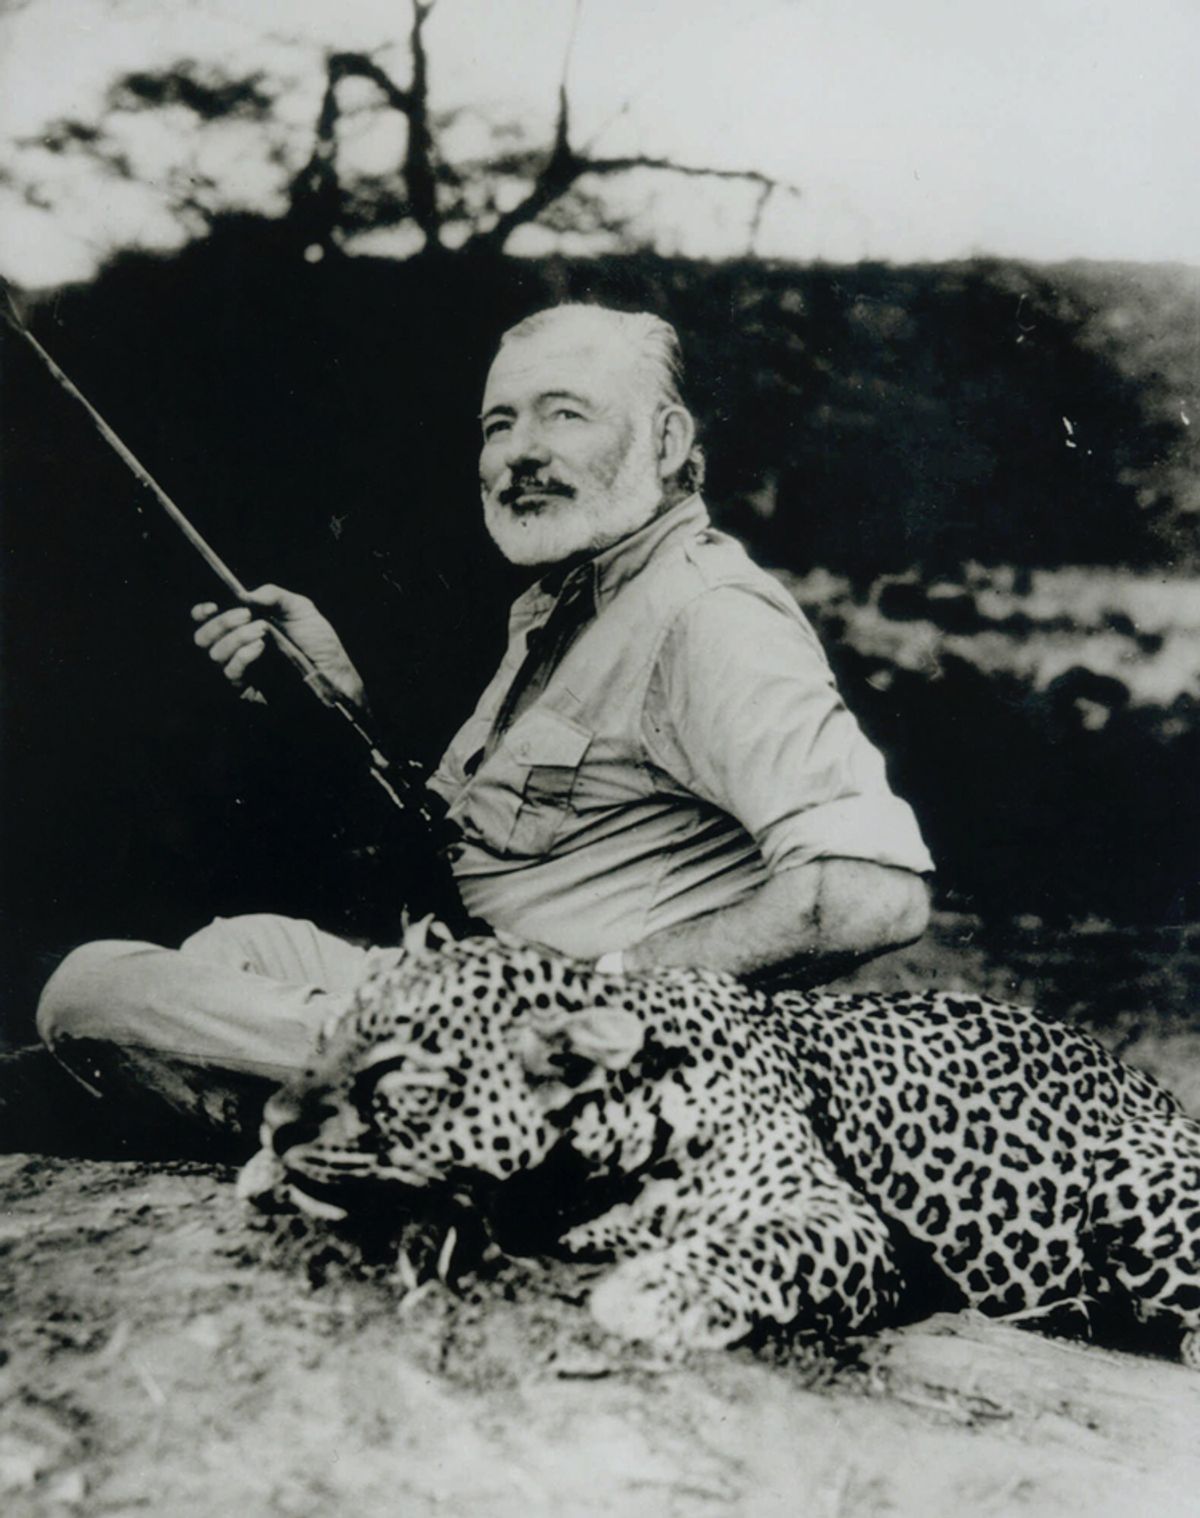 Ernest Hemingway poses with a dead leopard in 1953, part of an exhibit of Hemingway photos to celebrate his 100th birthday on display at Washington's National Portrait Gallery through Nov. 7, 1999. Hemingway, who killed himself three weeks before his 61st birthday, would have been 100 on July 21. (AP Photo/National Portrait Gallery, Earl Theisen)  (Earl Theisen)